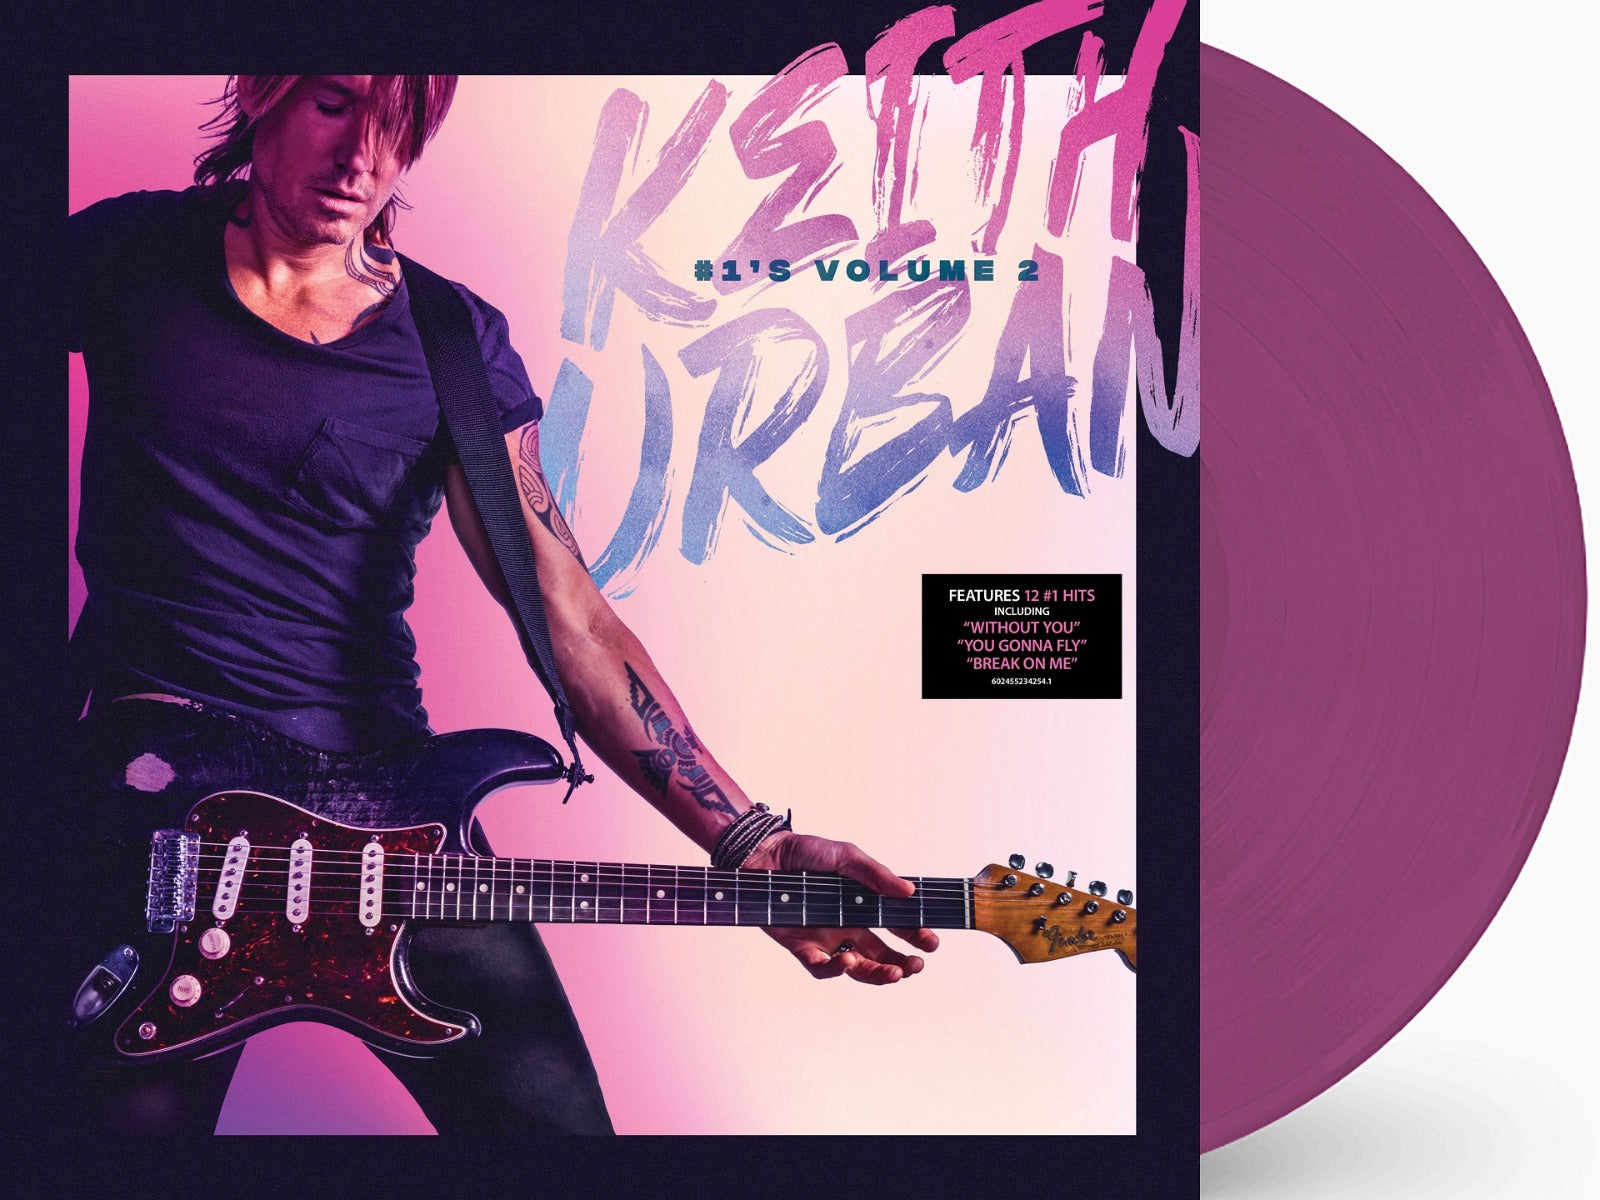 Keith Urban | Keith Urban - #1's Volume 2 (Limited Edition, Grape Colored Vinyl, Poster) | Vinyl